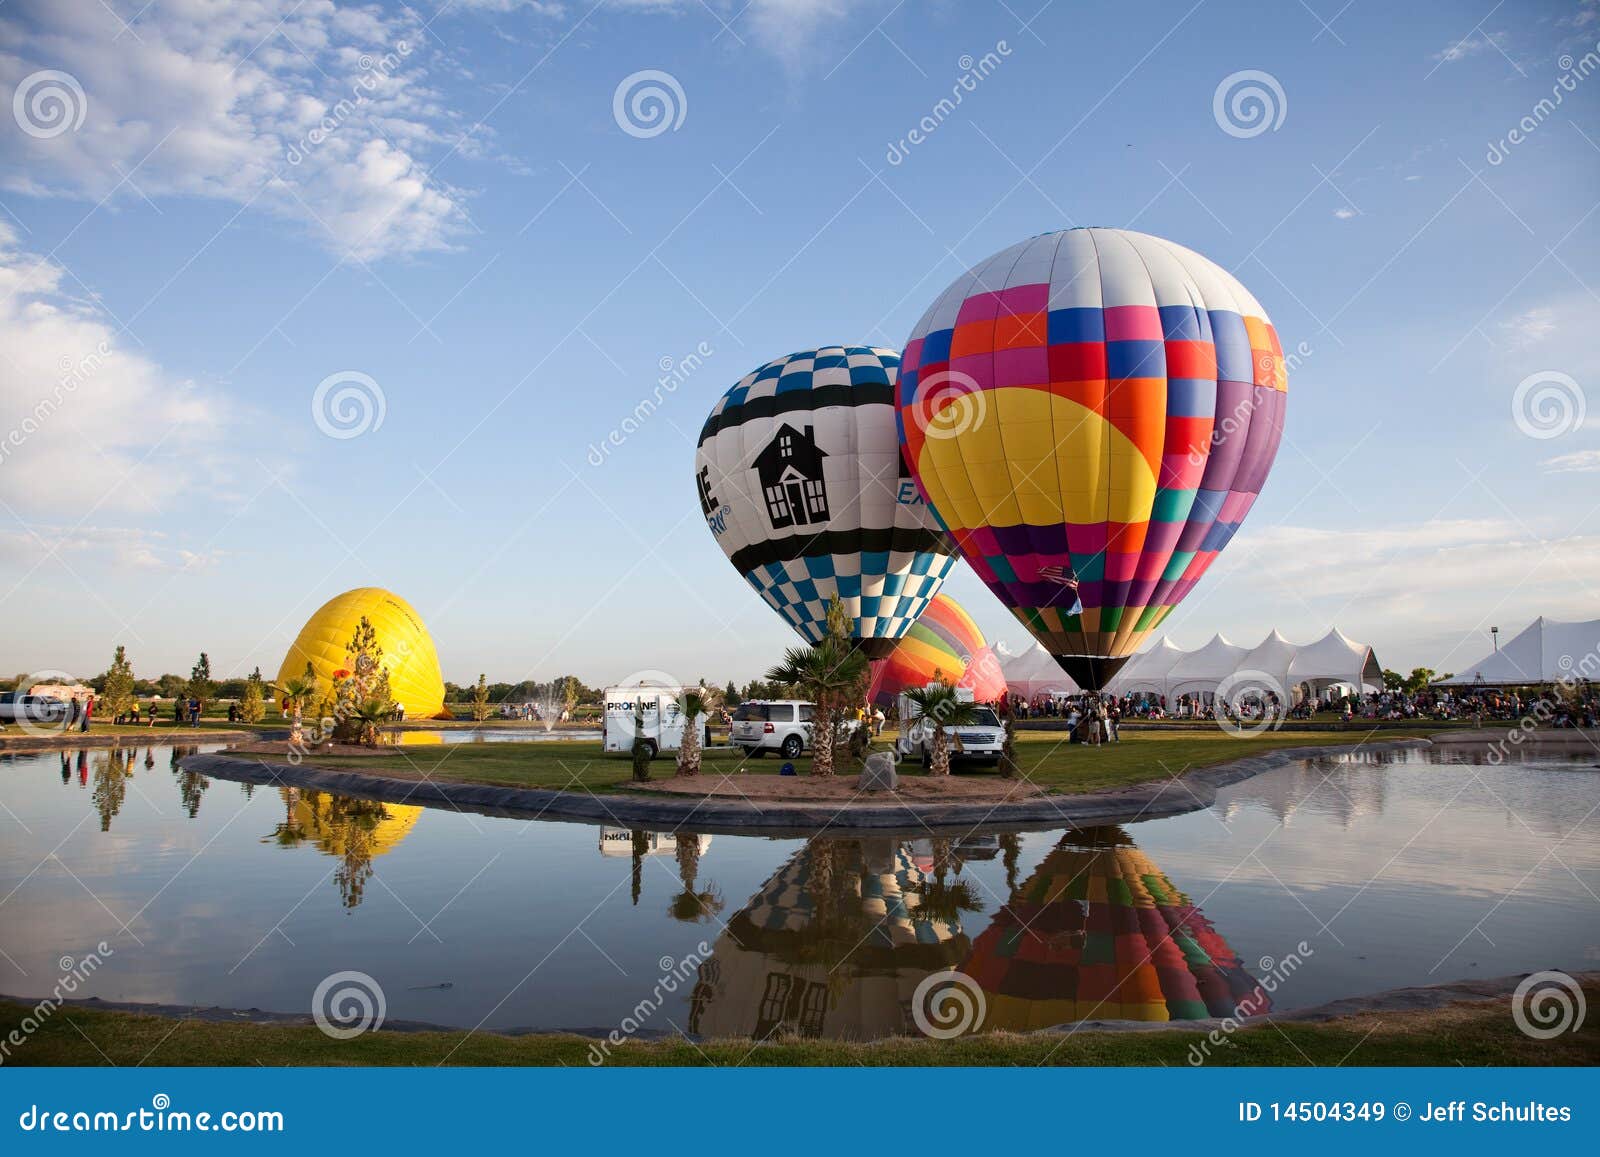 Hot Air Balloons Editorial Stock Image Image Of Colorful 14504349